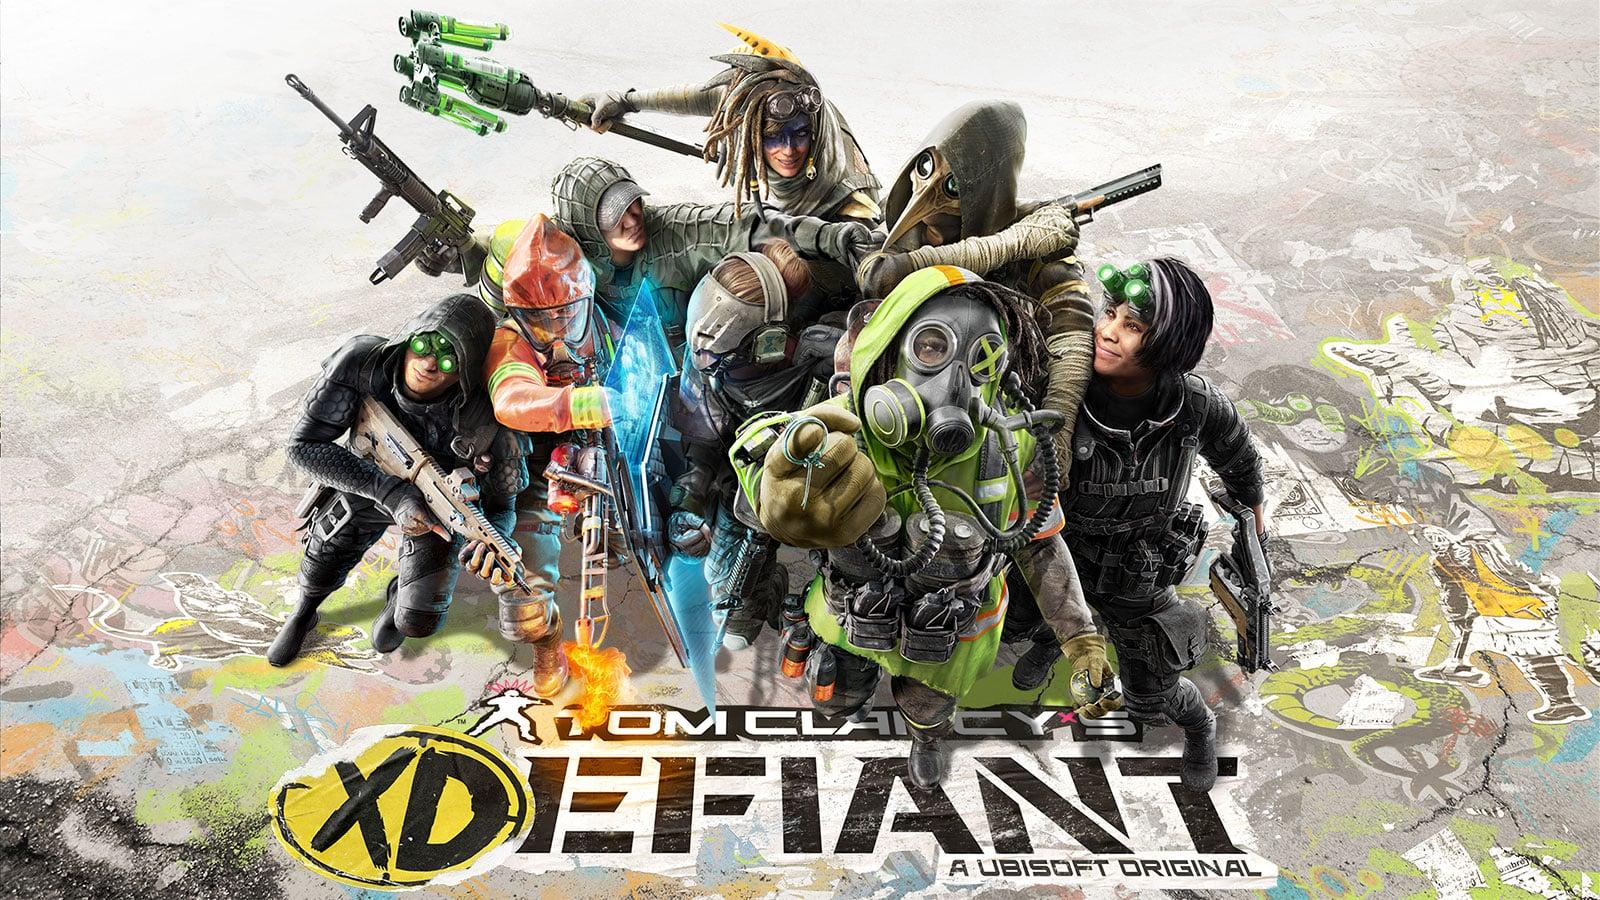 An image of Tom Clancy characters with the XDefiant logo